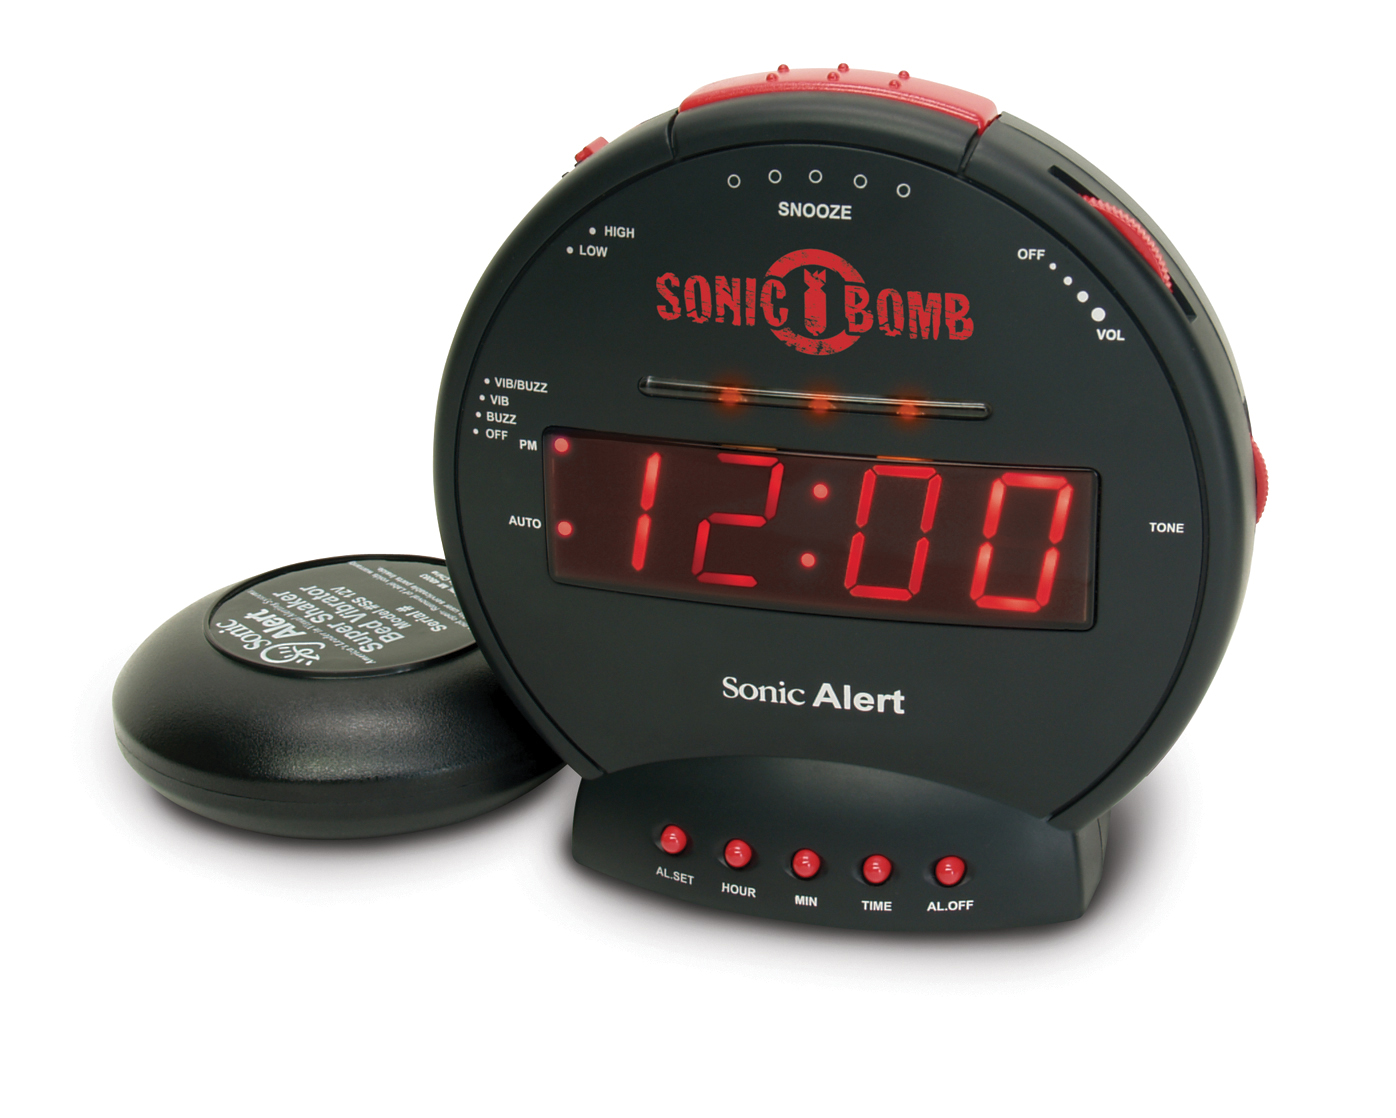 The Sonic Bomb vibrating alarm clock wakes the Deaf, hard of hearing and deep sleepers.